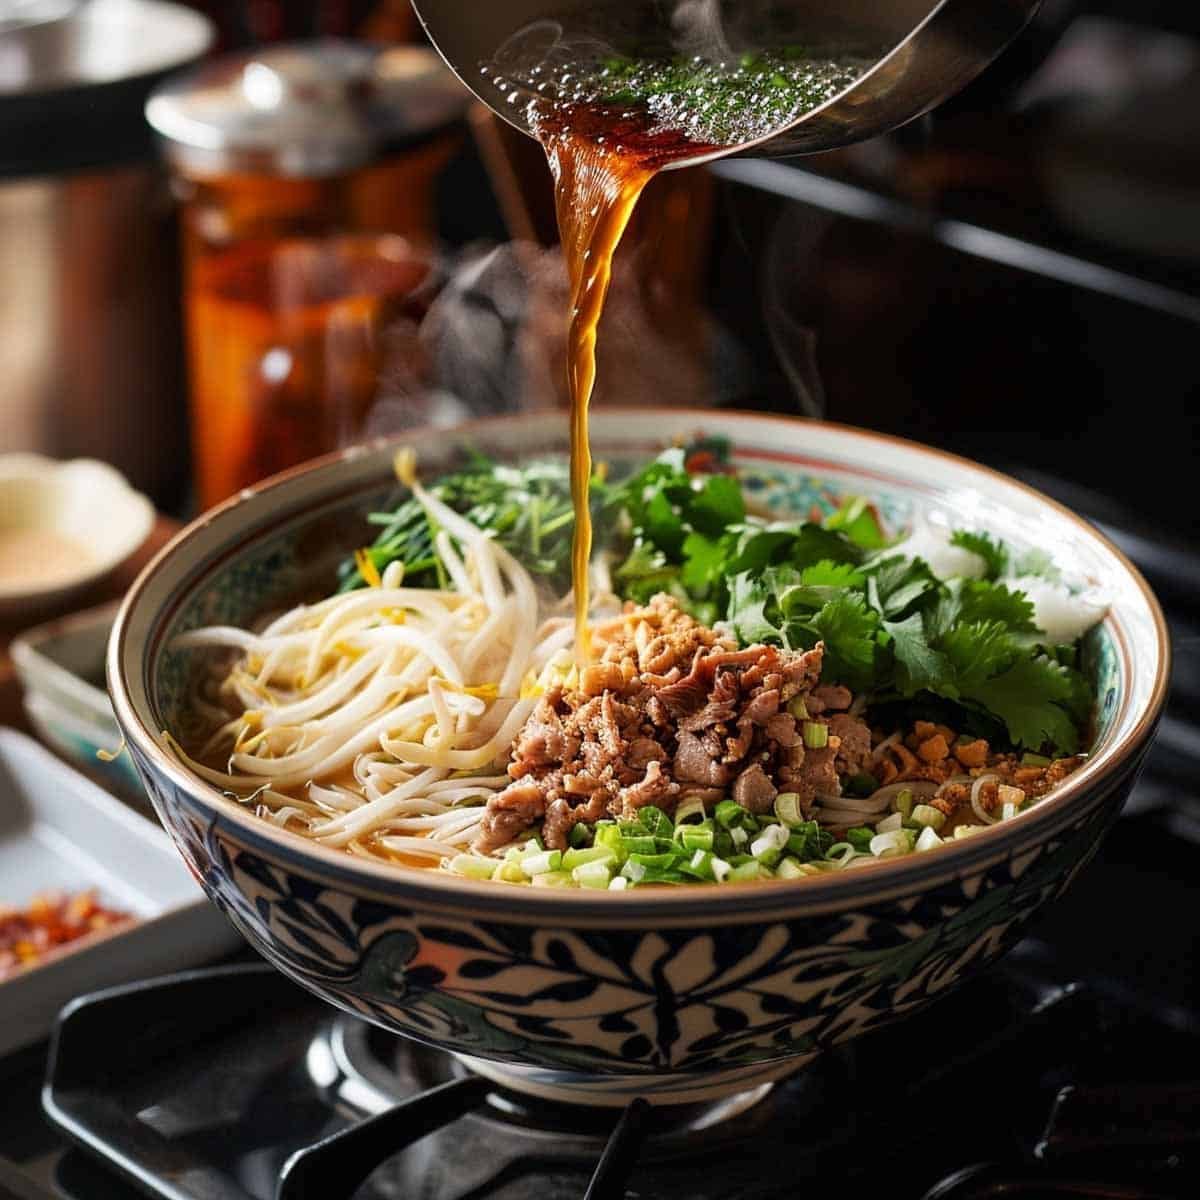 An image of Thai Boat Noodle soup being assembled: a bowl filled with soft rice noodles at the base, topped with thinly sliced beef, bean sprouts, Chinese water spinach, and other fresh garnishes. A person is pouring hot, steaming broth over the ingredients, blending them together, with kitchen utensils and ingredients scattered around the workspace.